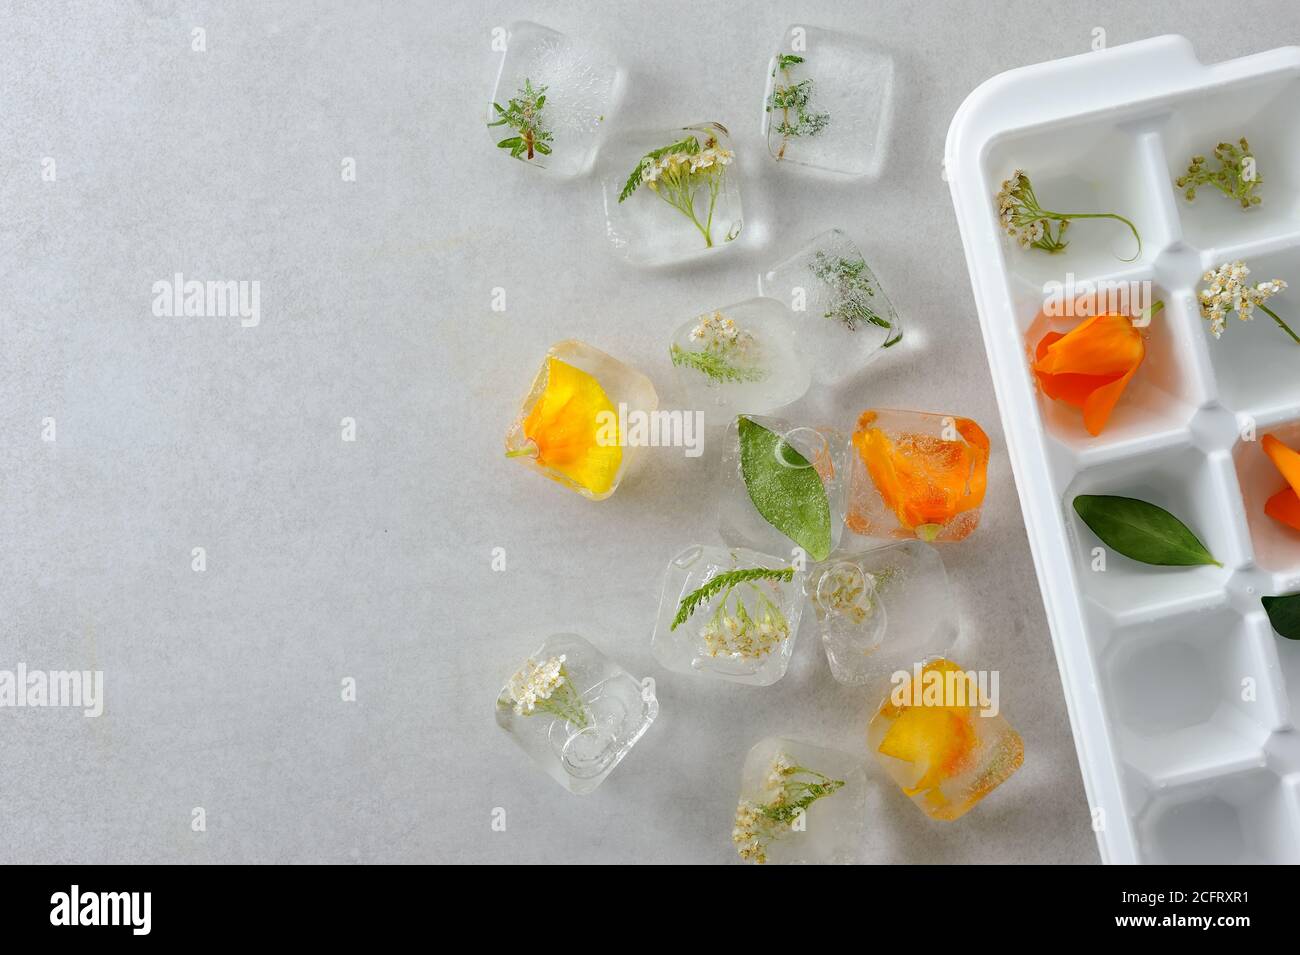 https://c8.alamy.com/comp/2CFRXR1/floral-ice-cubes-on-the-gray-background-with-ice-mold-edible-flowers-frozen-in-ice-cubes-horizontal-with-space-for-text-2CFRXR1.jpg